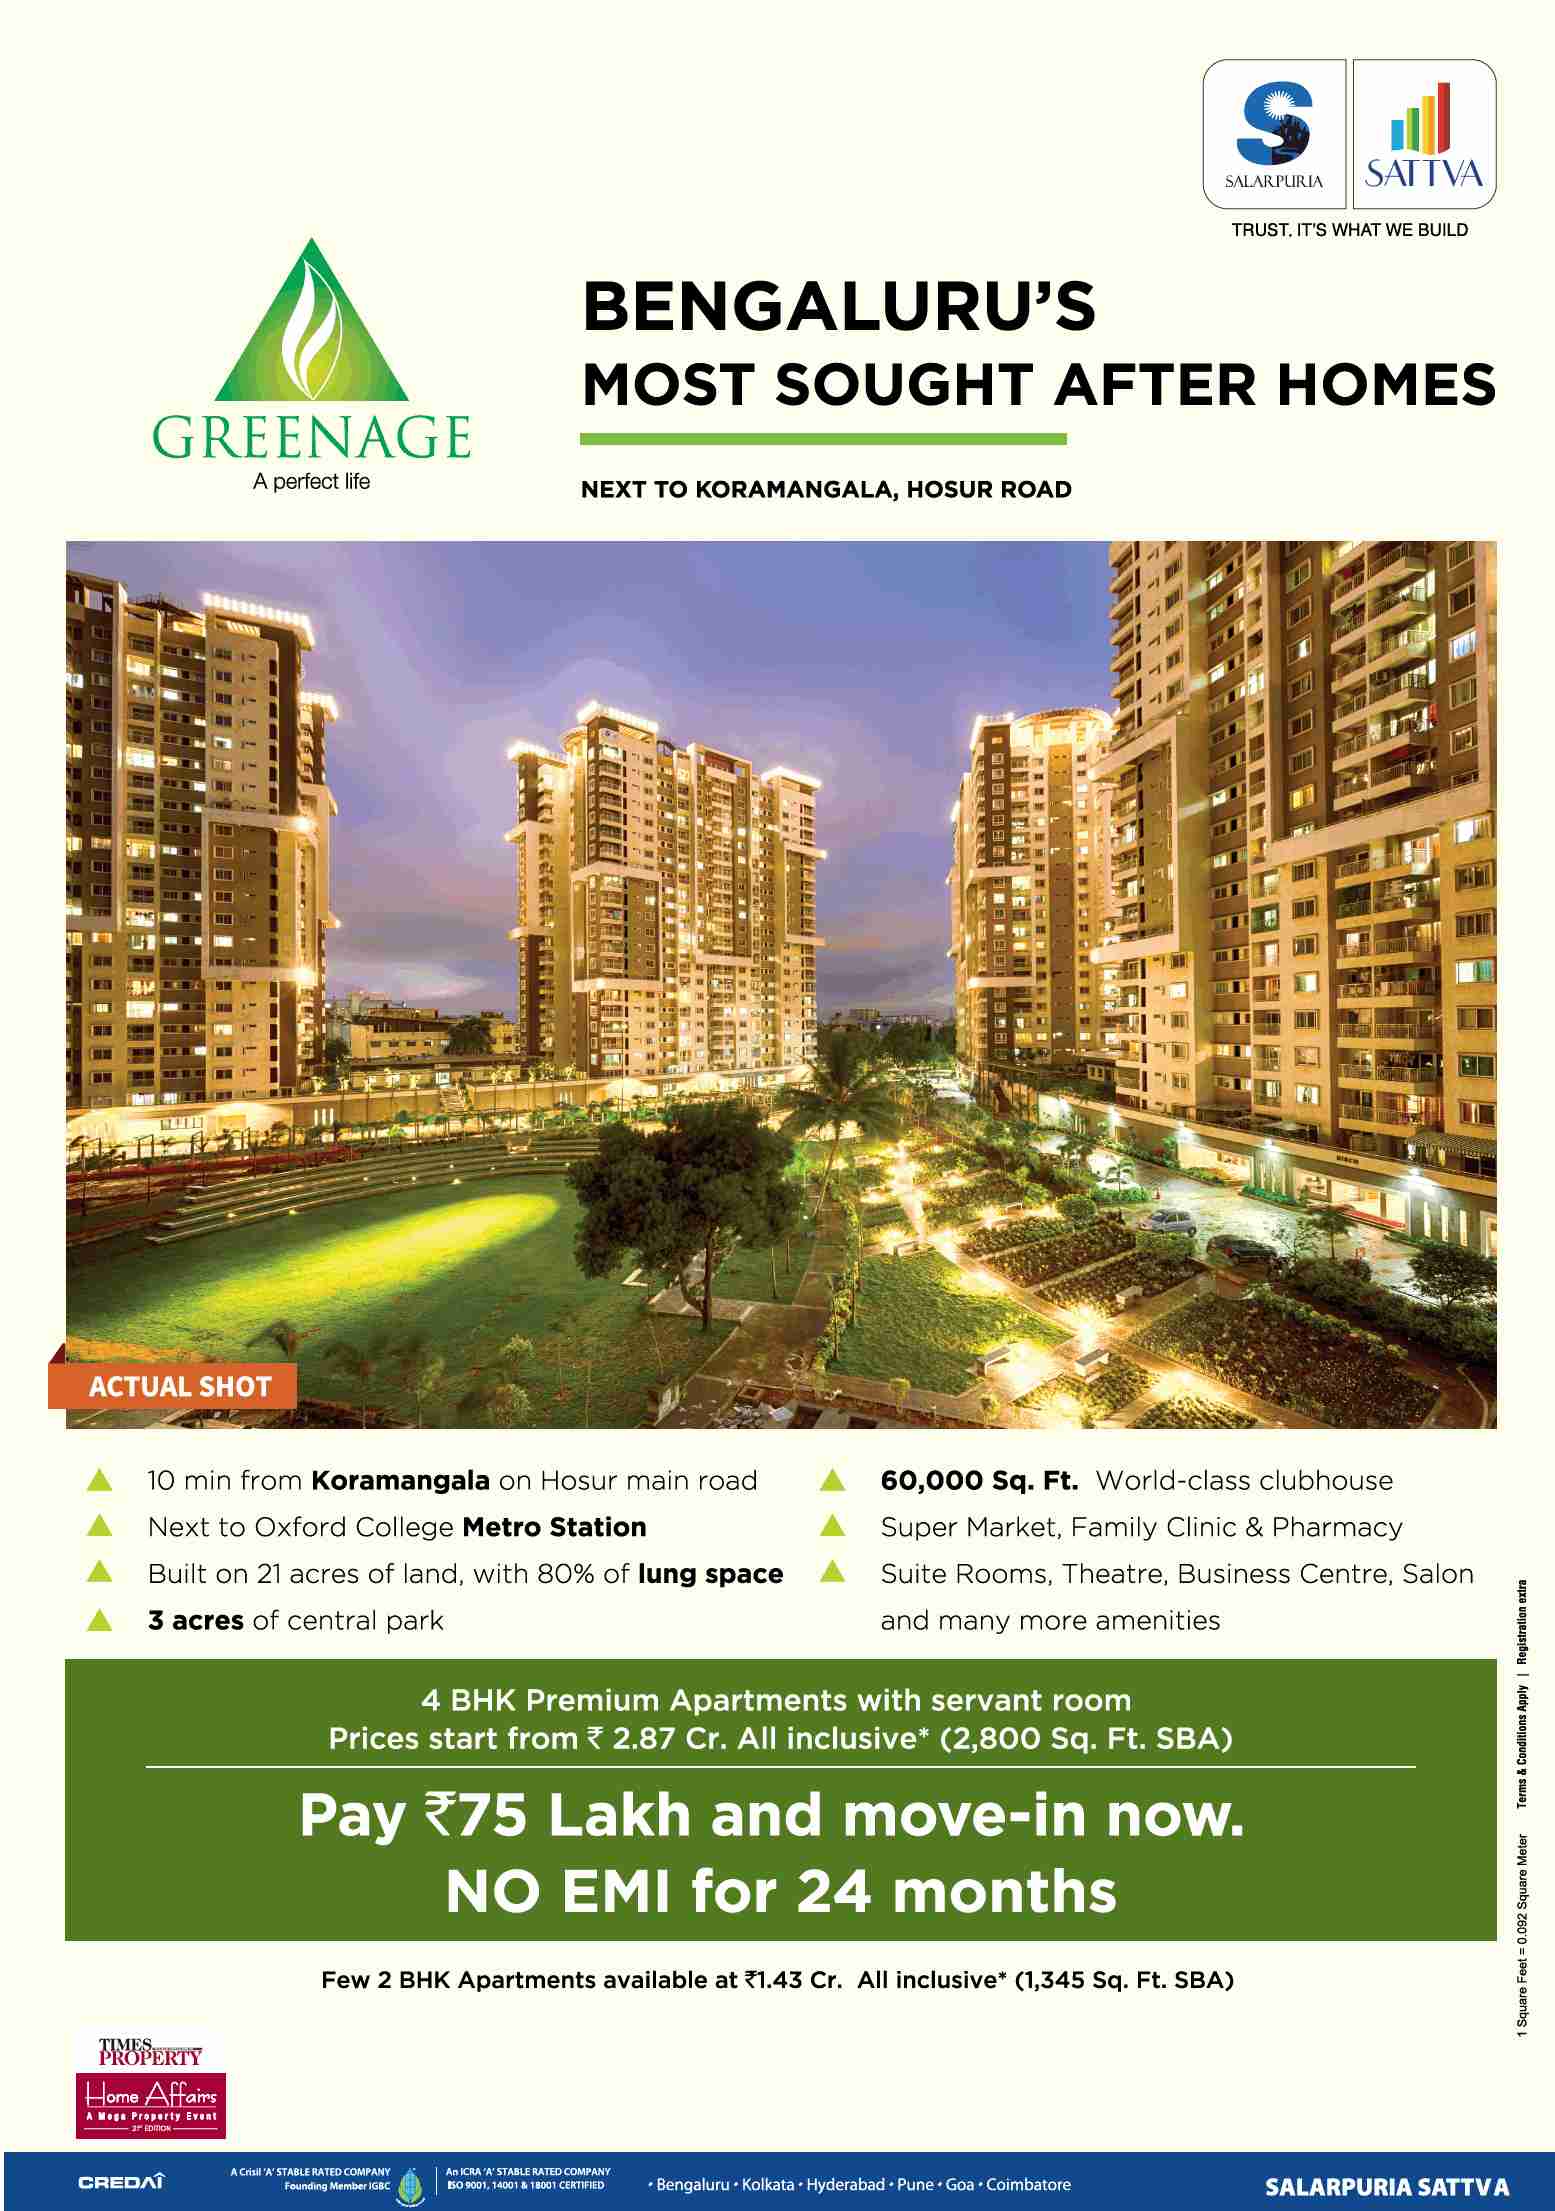 Pay Rs 75 Lakh & move in now with no EMI for 24 months at Salarpuria Sattva Greenage in Bangalore Update